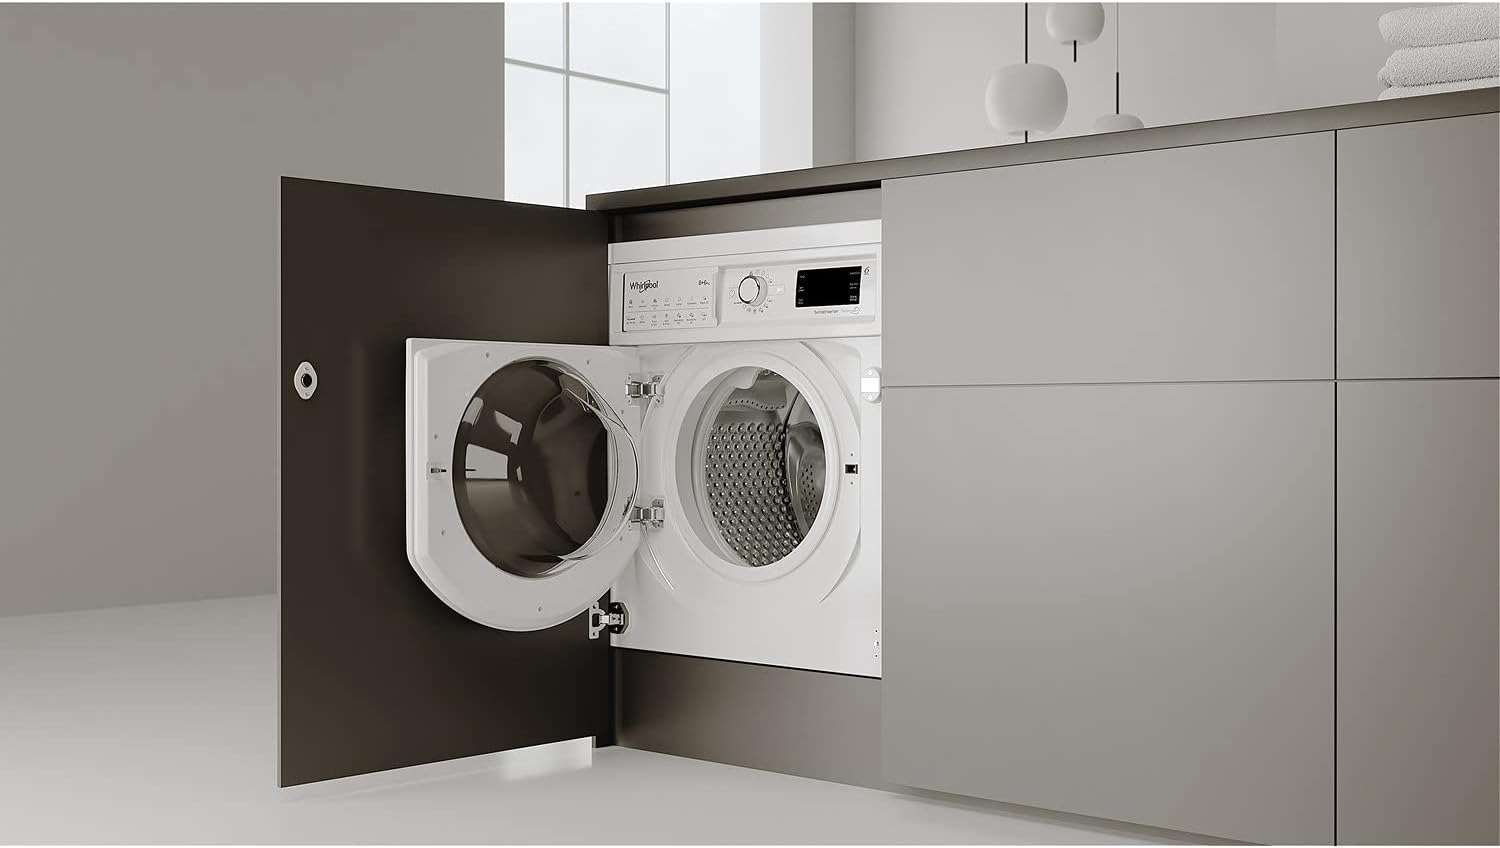 Whirlpool FreshCare BI WDWG 961484 UK Built - in 9/6kg Washer Dryer, 1400rpm, White - Amazing Gadgets Outlet